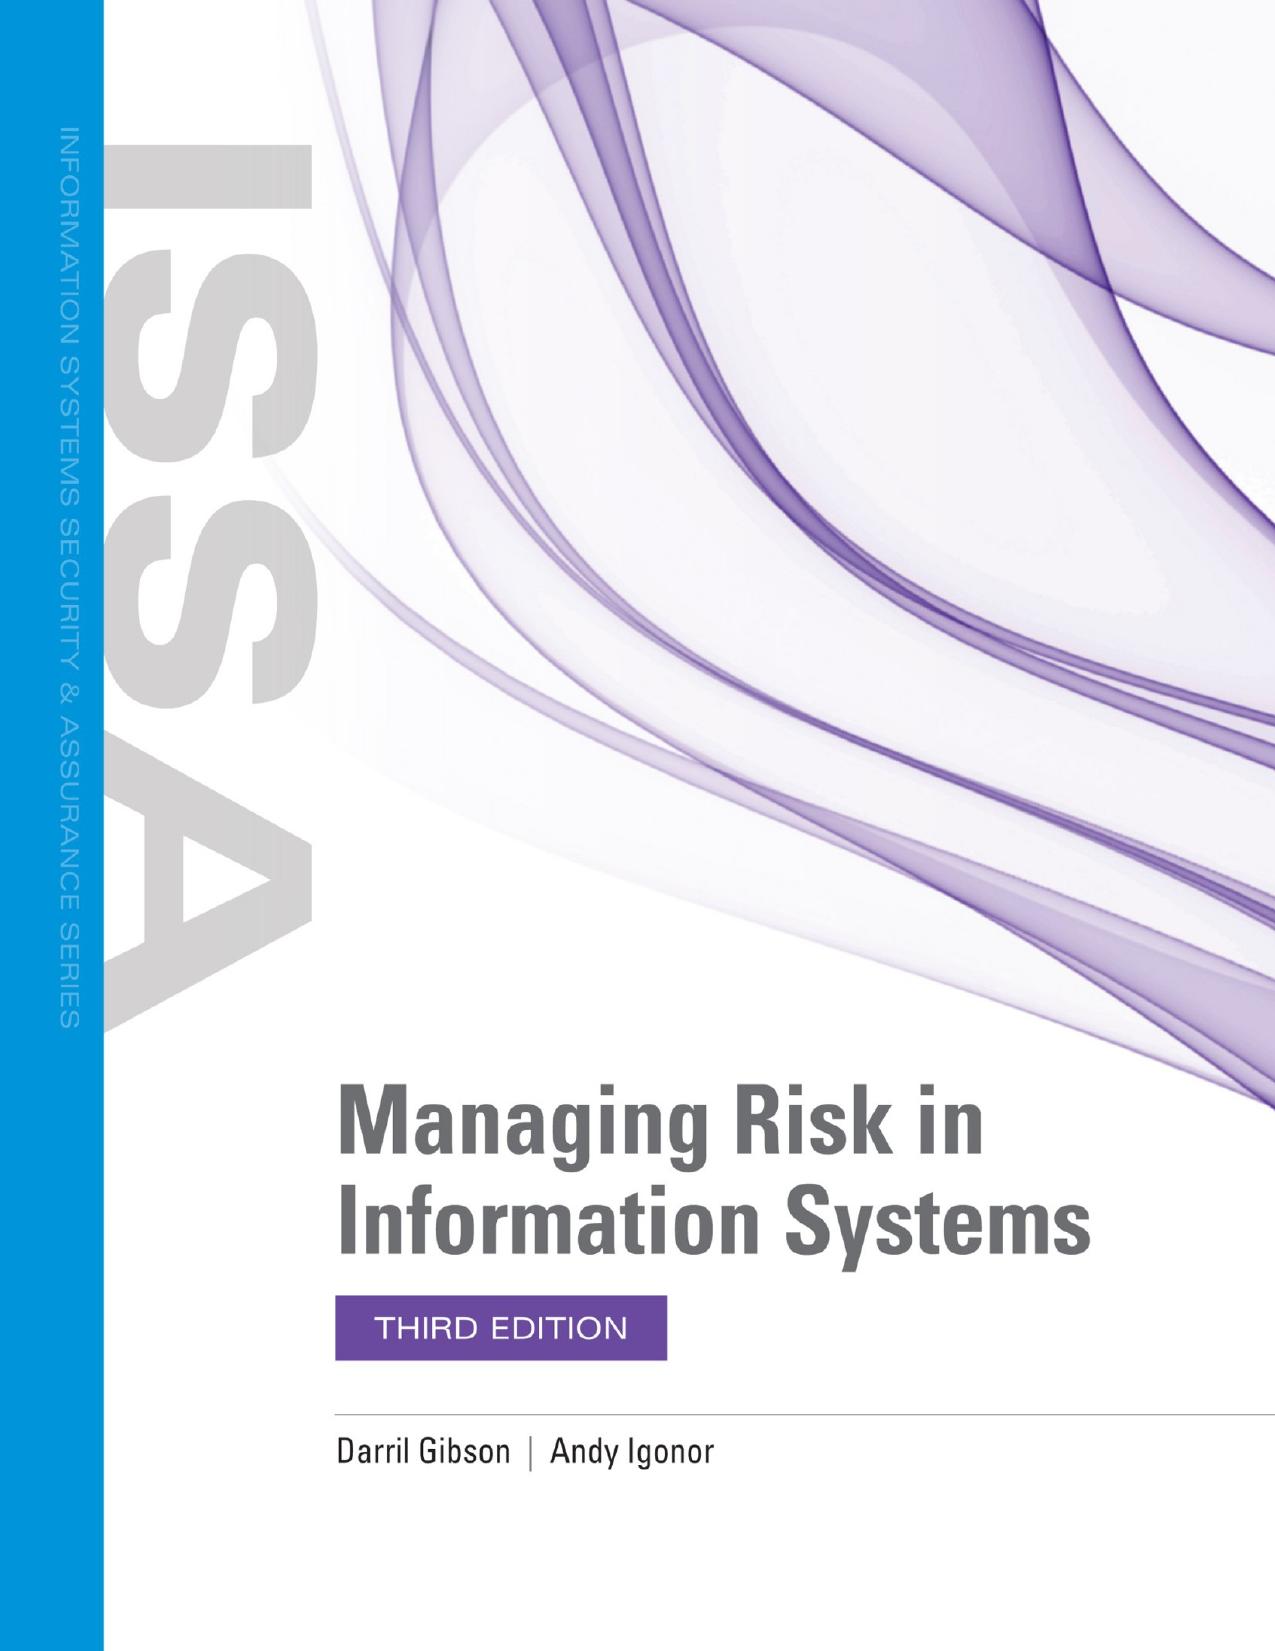 Managing Risk in Information Systems (Information Systems Security & Assurance) 3rd Edition by Darril Gibson , Andy Igonor